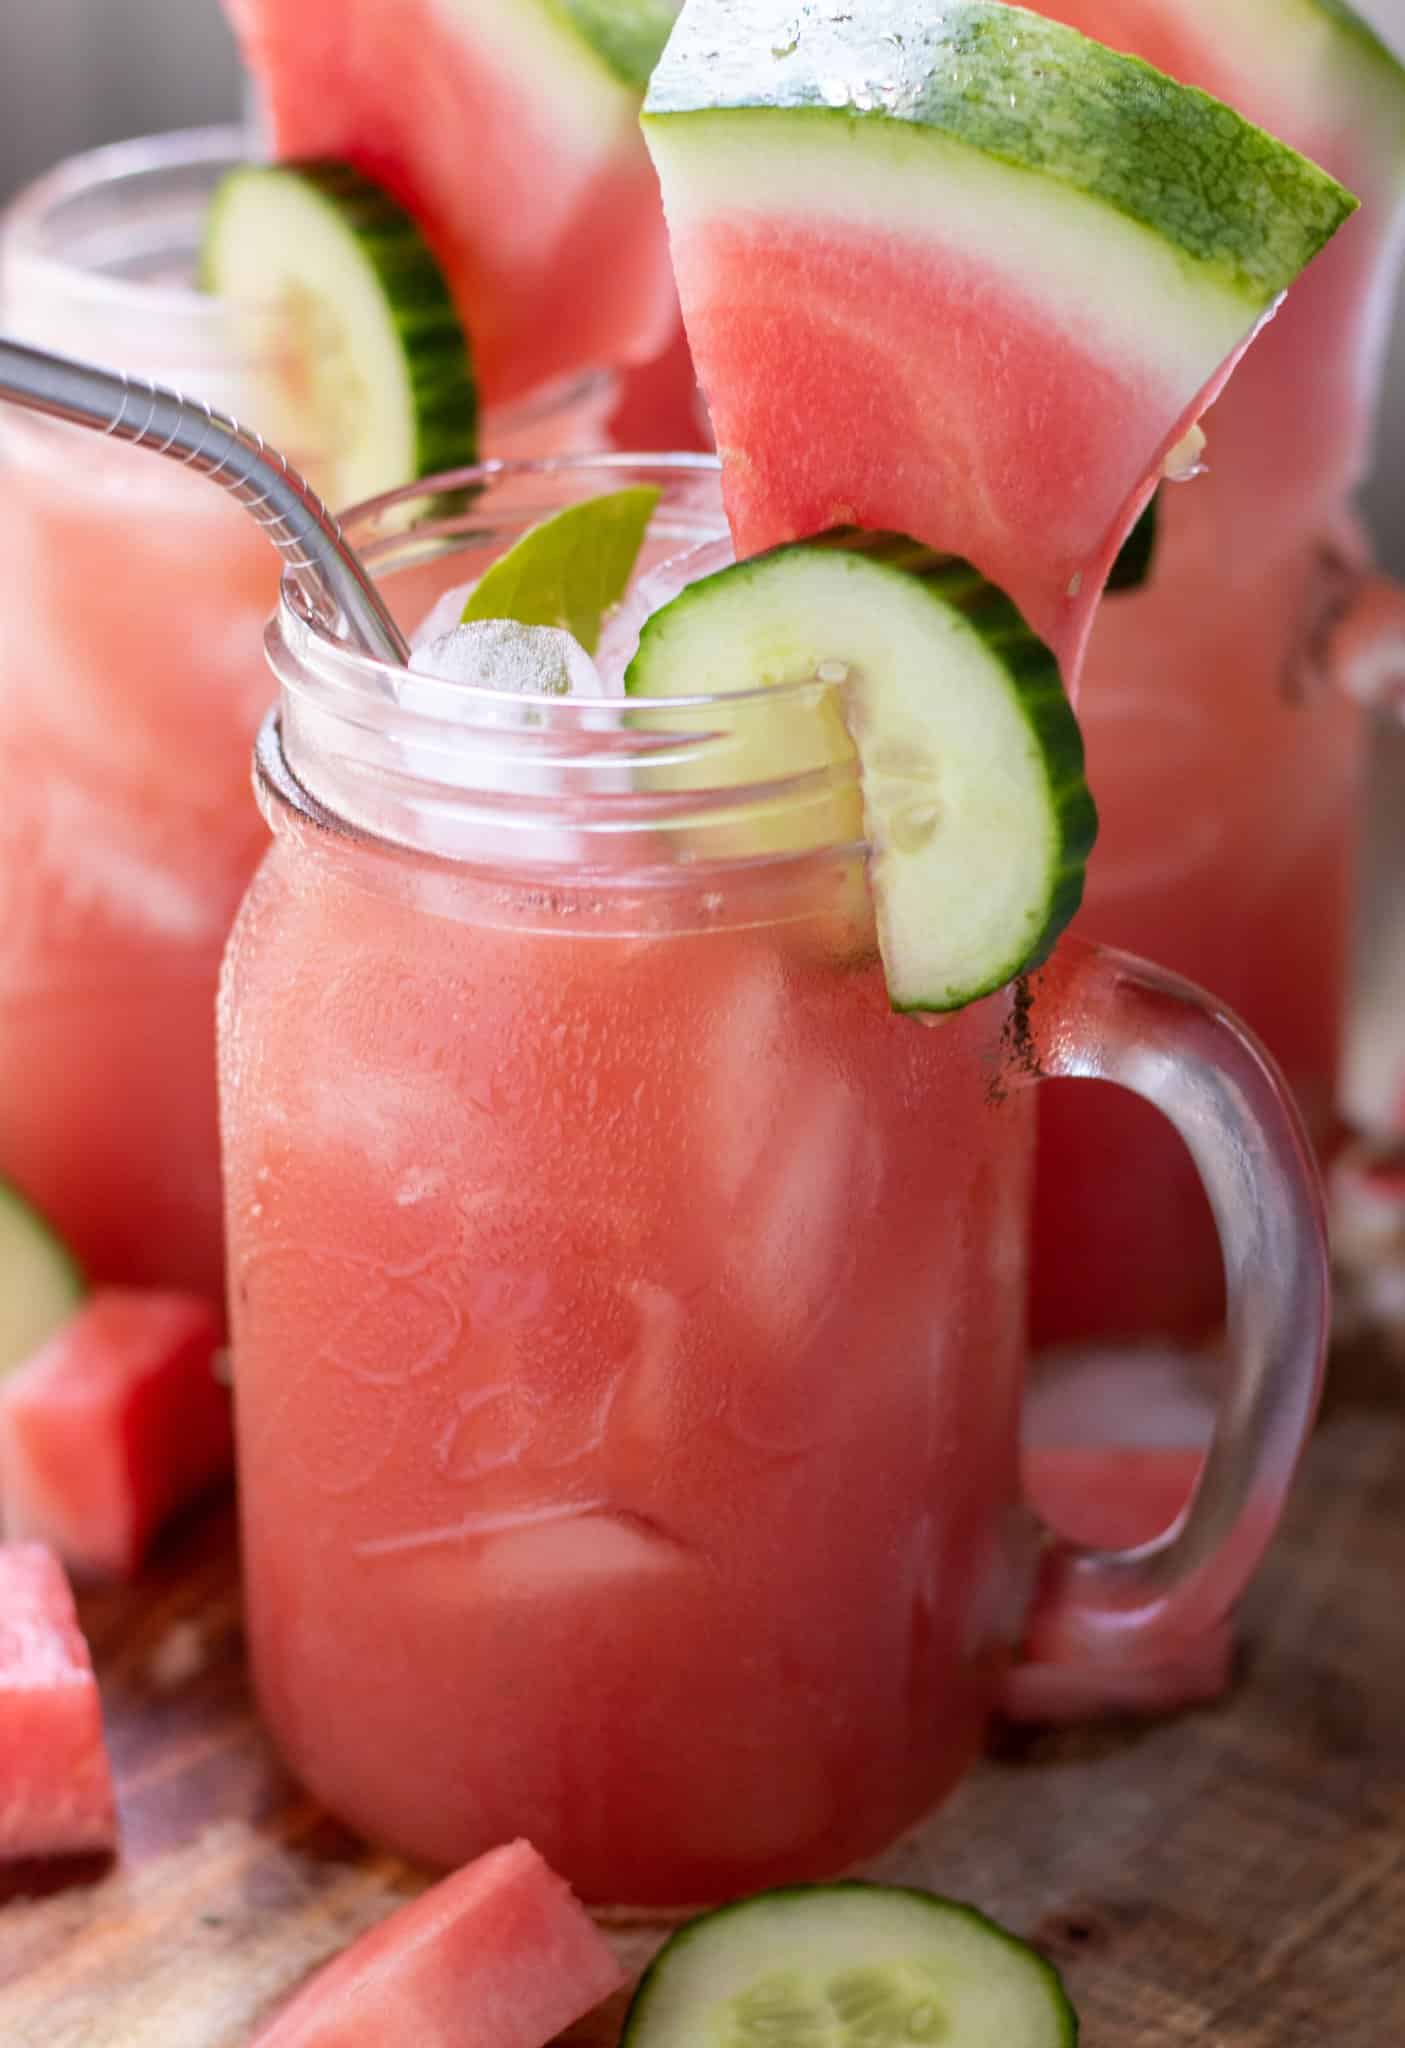 mason jar drink glasses filled with watermelon lemonade. They're garnished with a cucumber slice and small lemon wedge on the rim. The glasses have a metal drinking straw in them with ice in the glass.